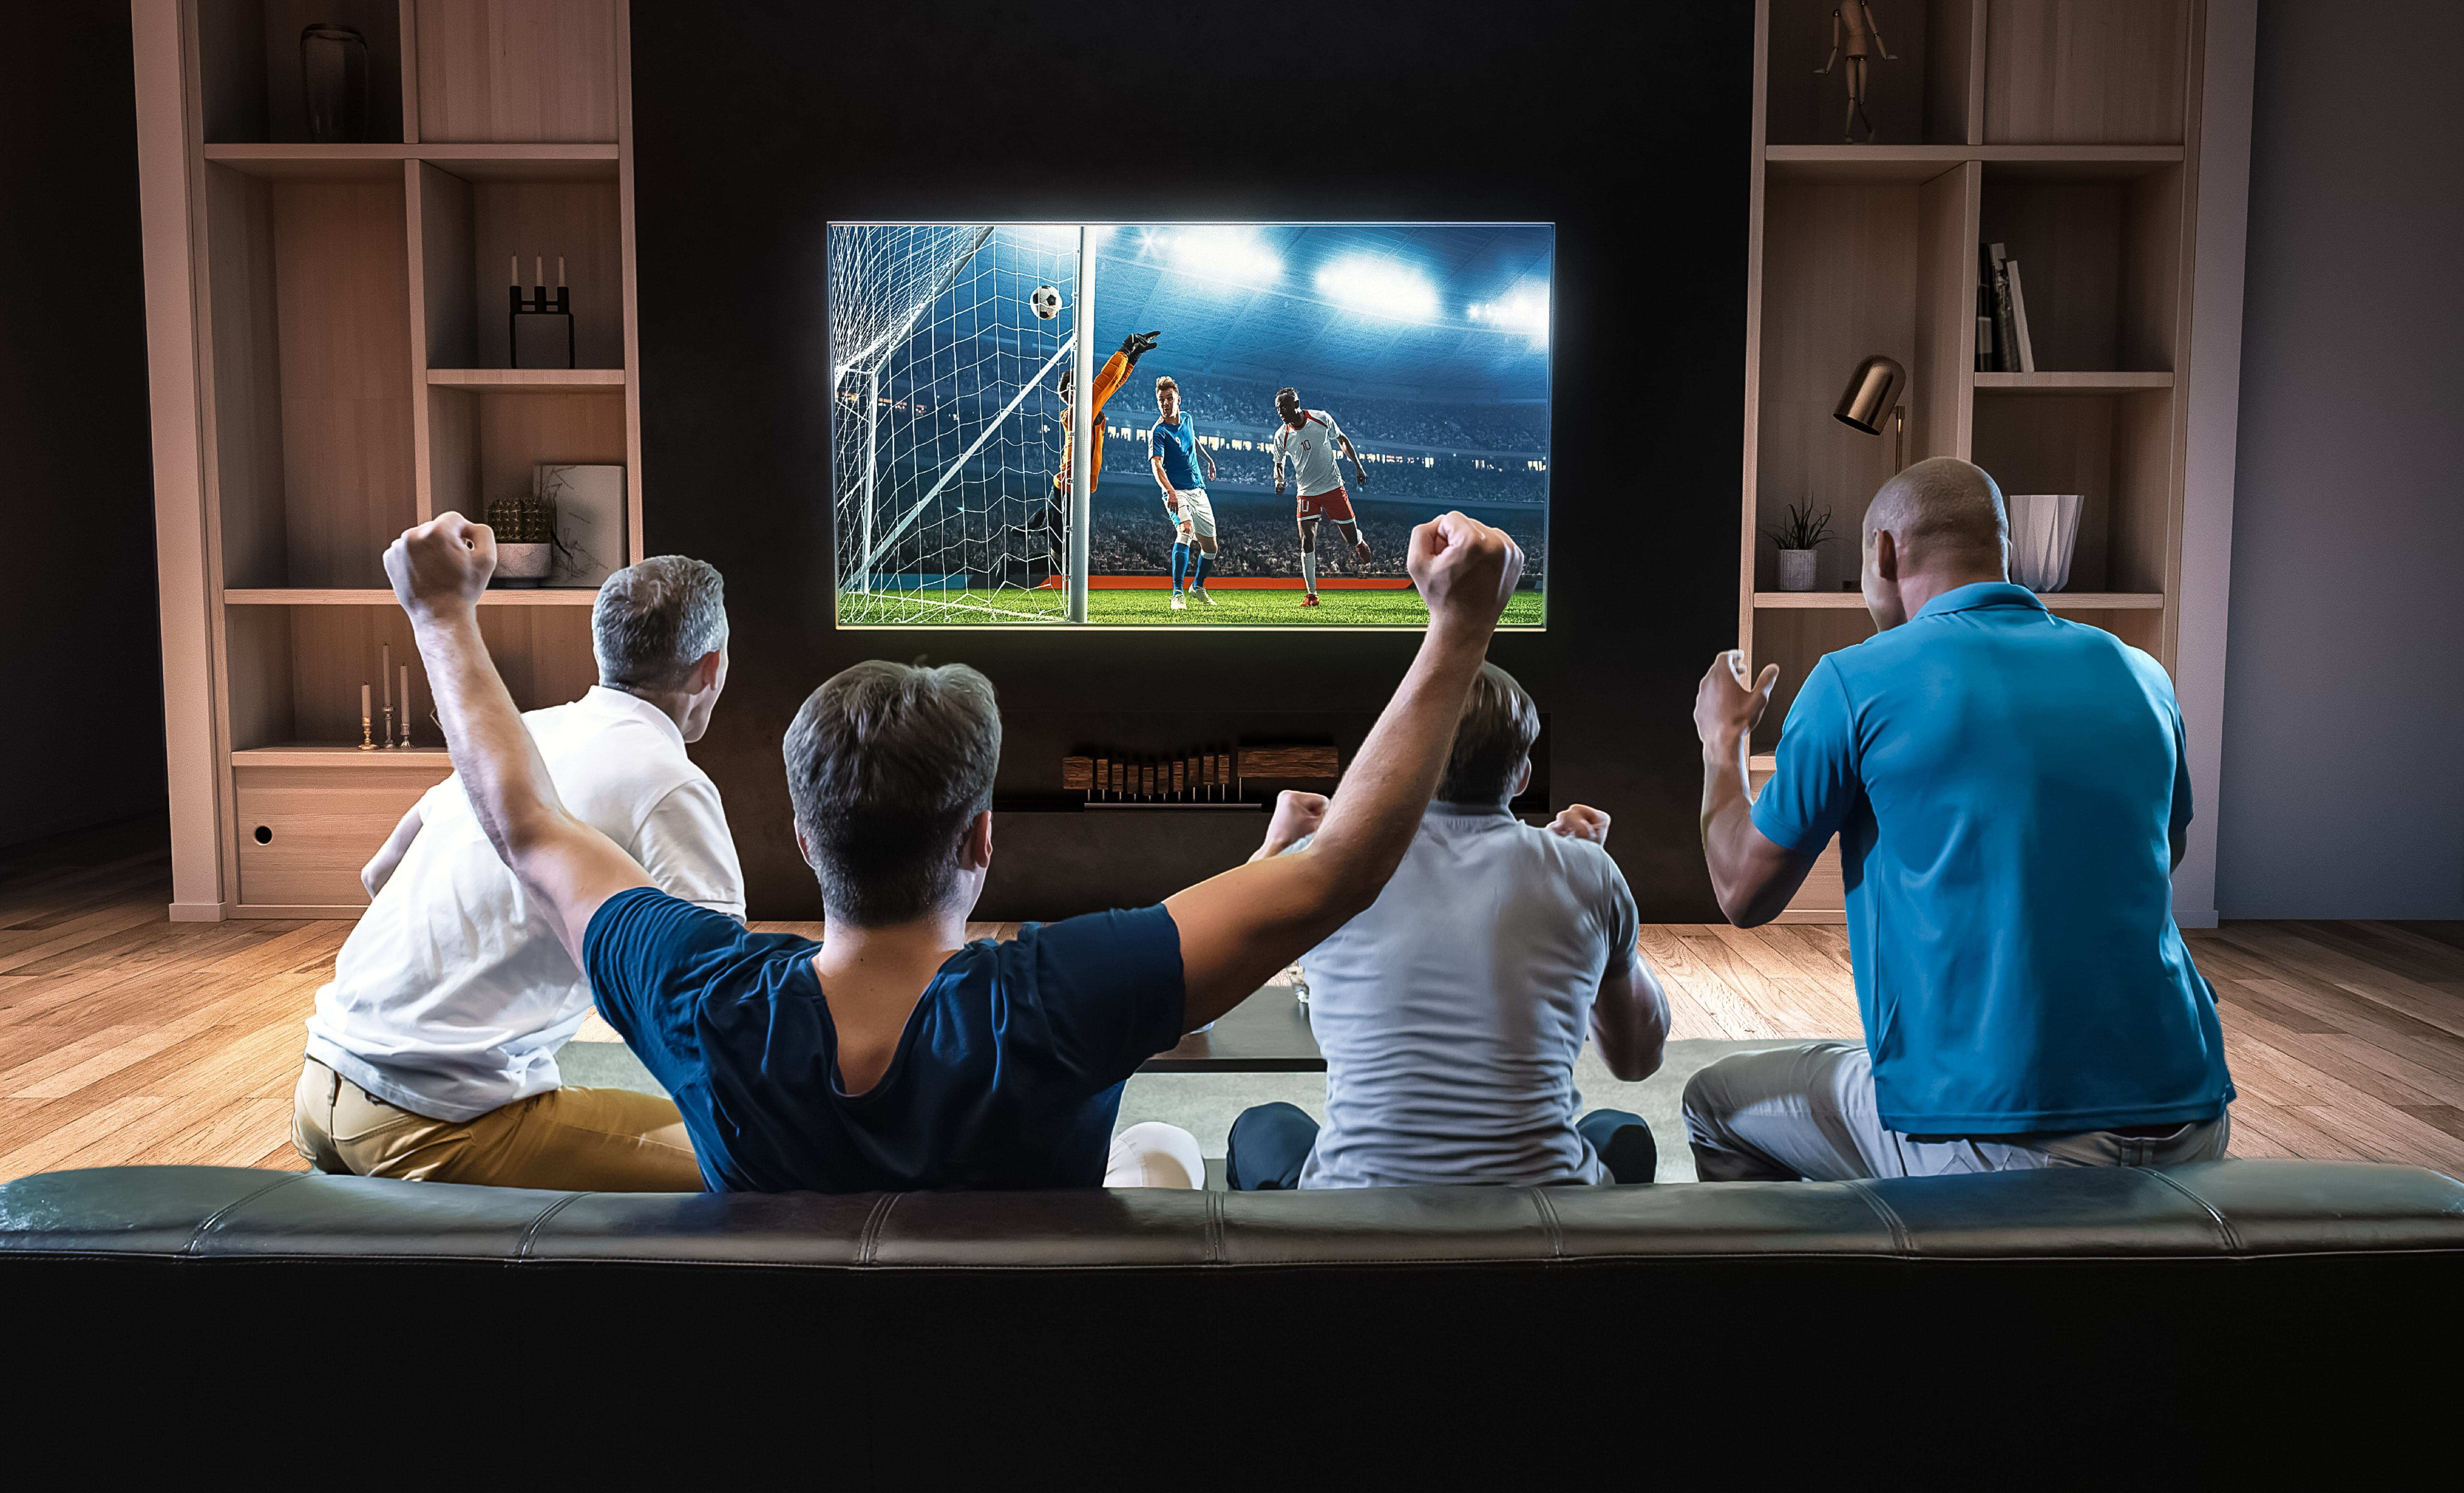 A group of friends watch a soccer game on TV.